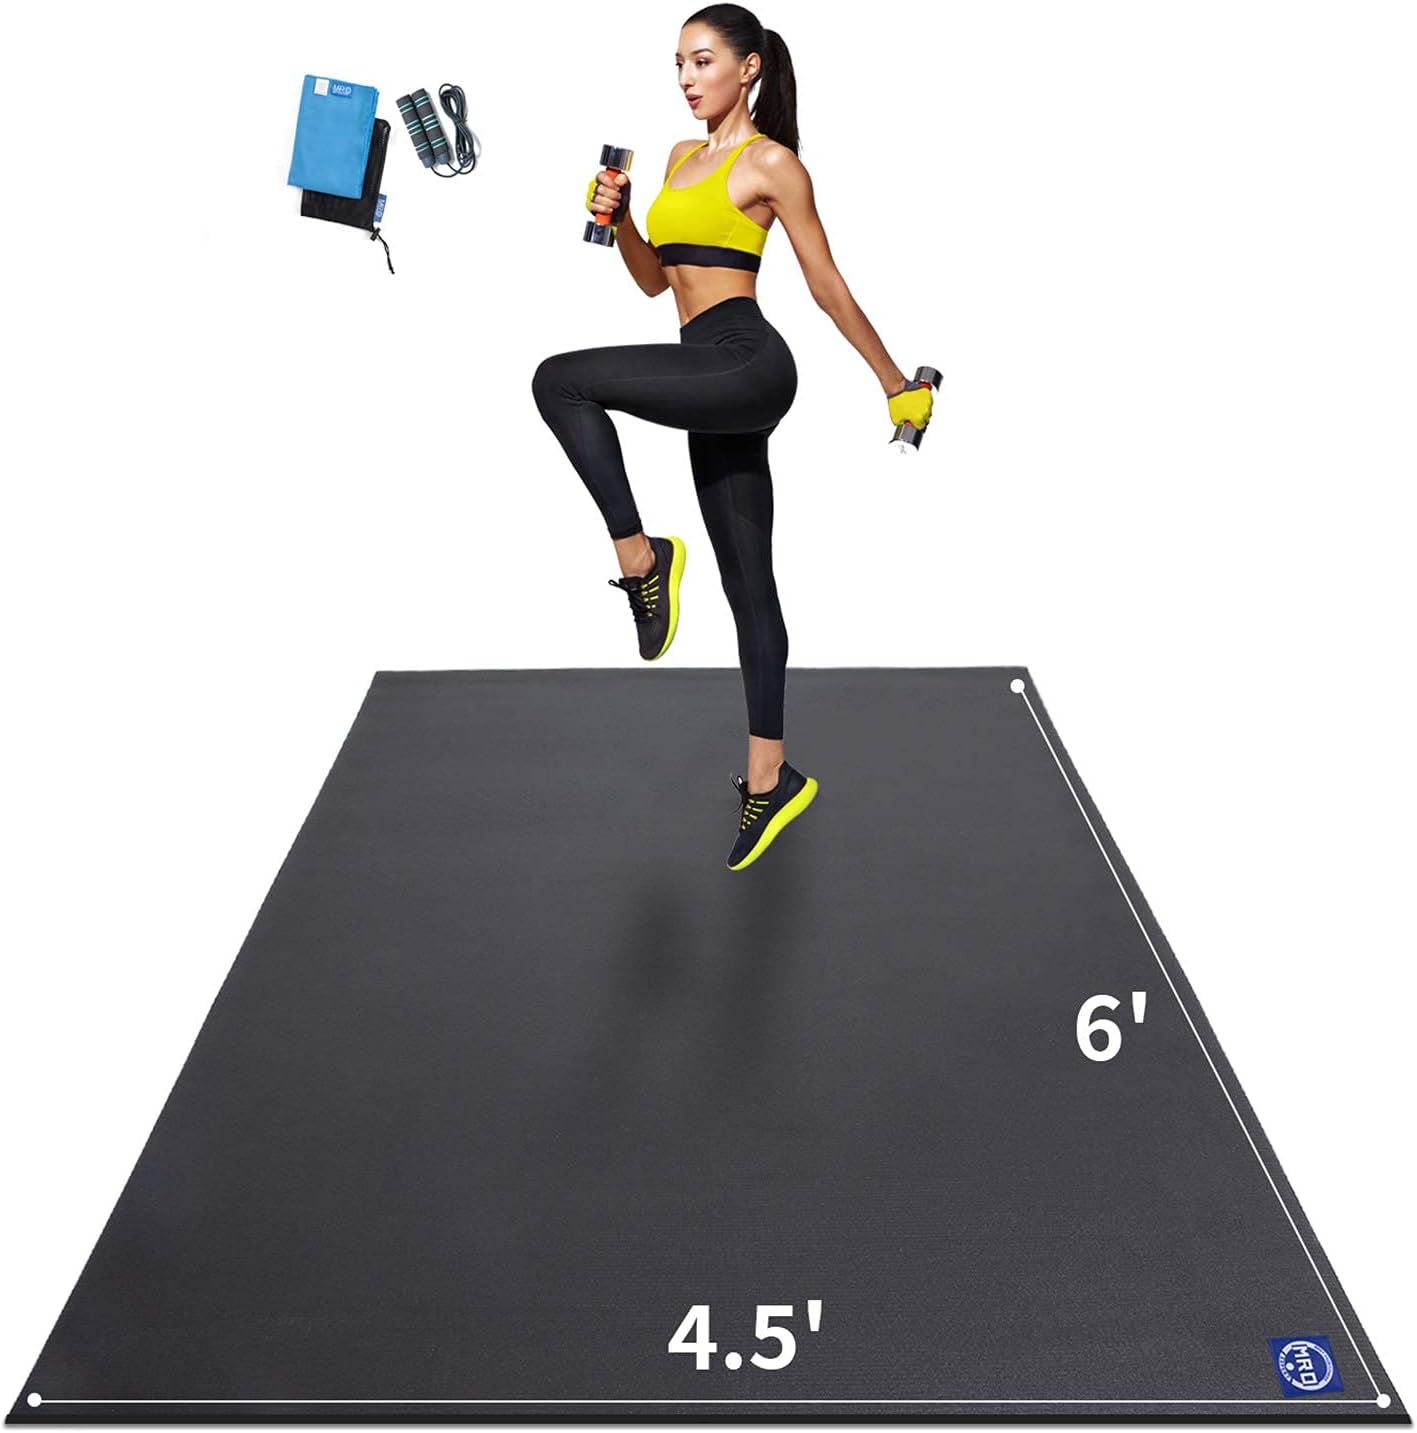 Premium Large Exercise Mat 6'x4.5'x7mm, Ultra Durable Workout Mats for Home Gym Flooring, Non-Slip, Thick Cardio Mat for Plyo, MMA, Jump, Weightlifting- Shoe Friendly, Eco Friendly